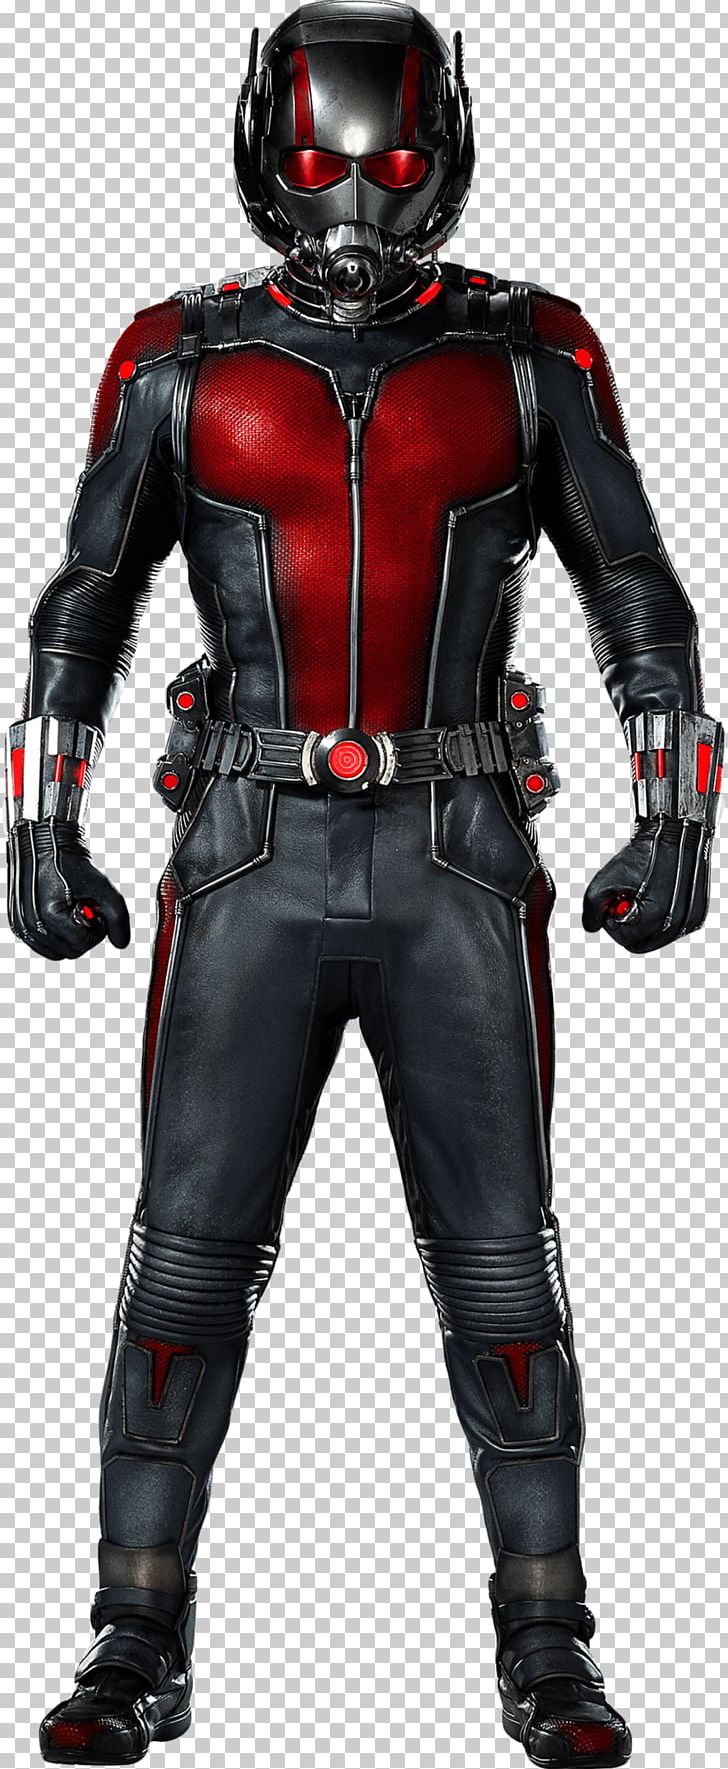 Hank Pym Wasp Ant-Man Marvel Cinematic Universe PNG, Clipart, Action Figure, Antman, Antman And The Wasp, Armour, Costume Free PNG Download